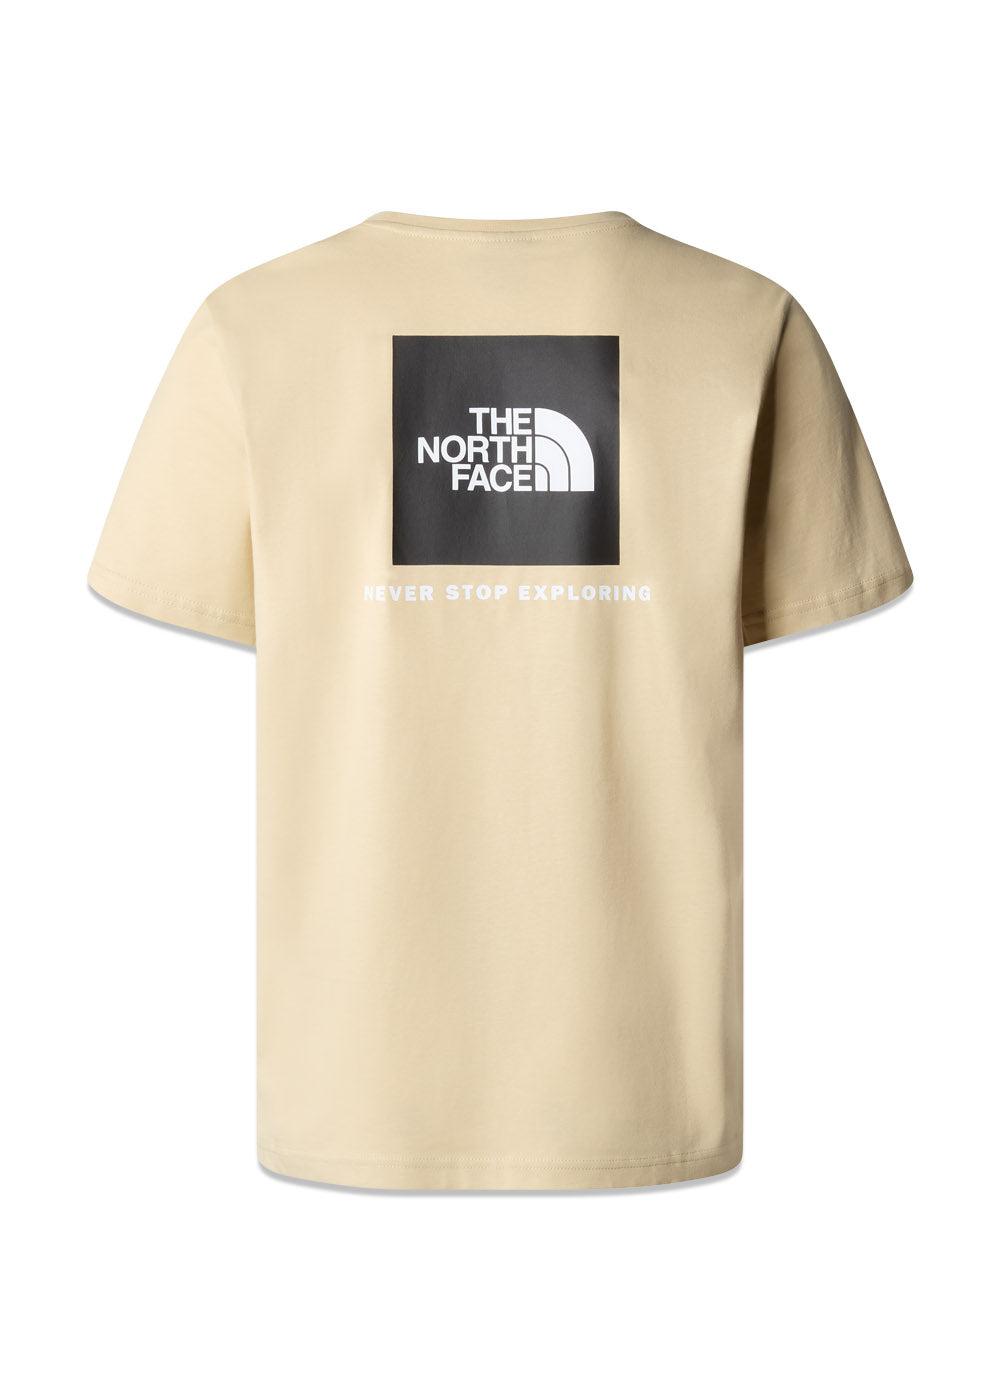 THE NORTH FACE REDBOX TEE - Gravel